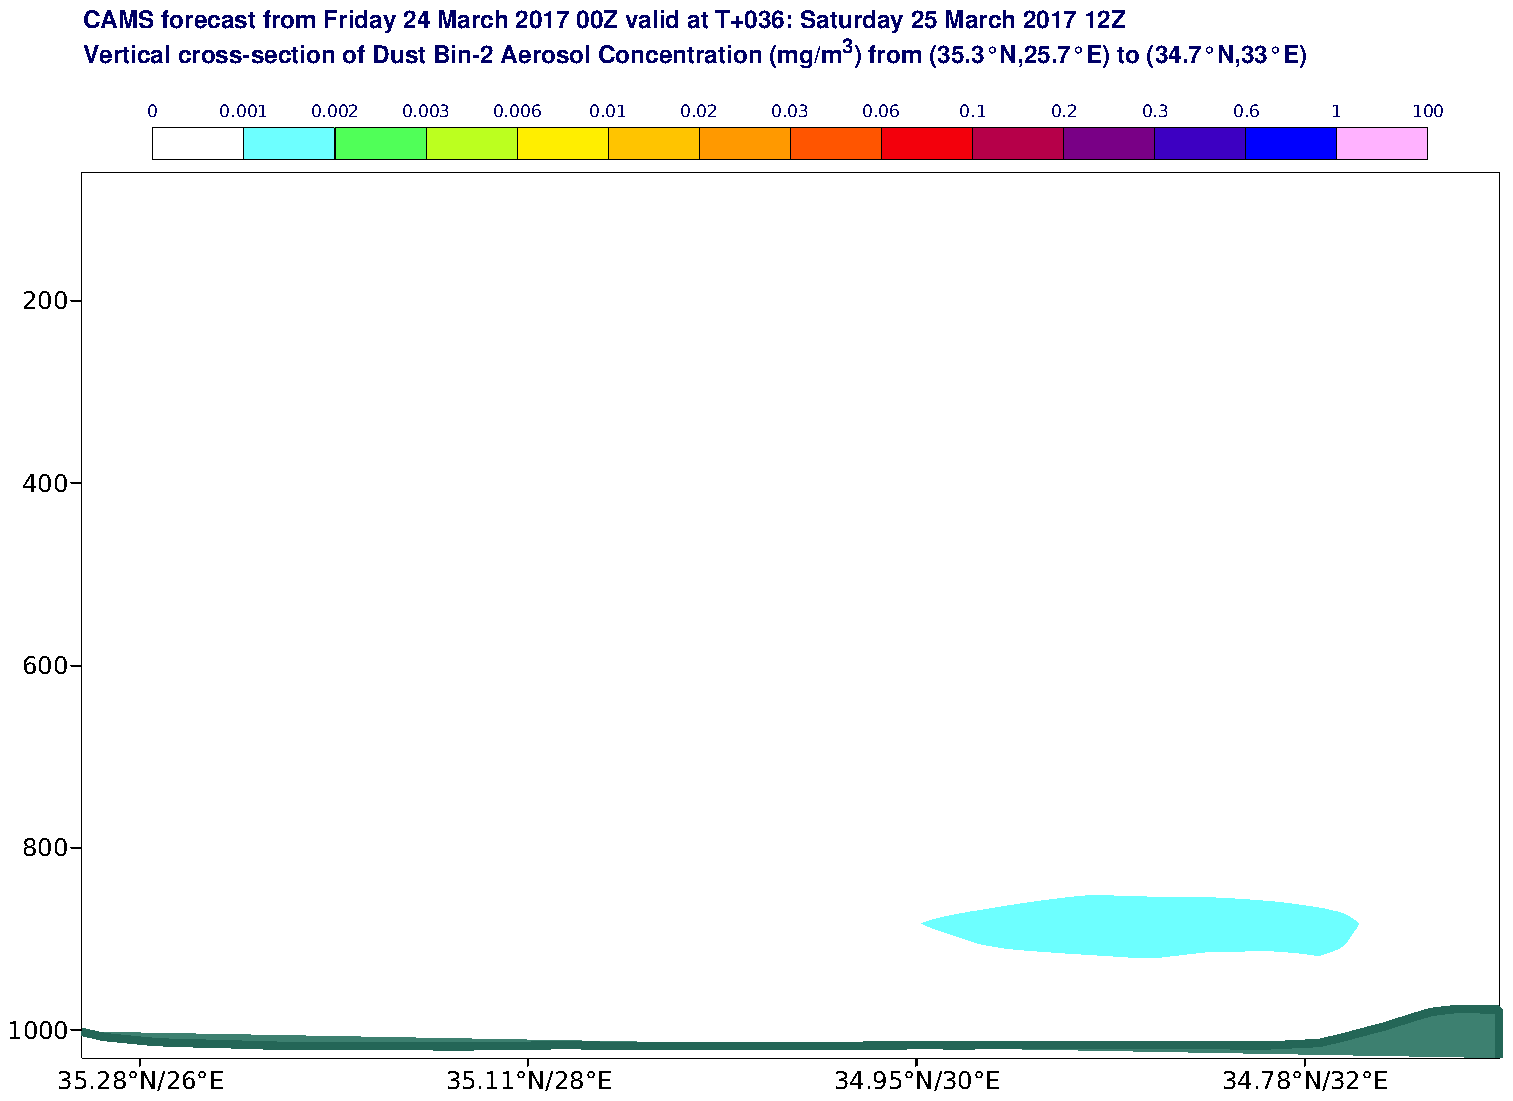 Vertical cross-section of Dust Bin-2 Aerosol Concentration (mg/m3) valid at T36 - 2017-03-25 12:00